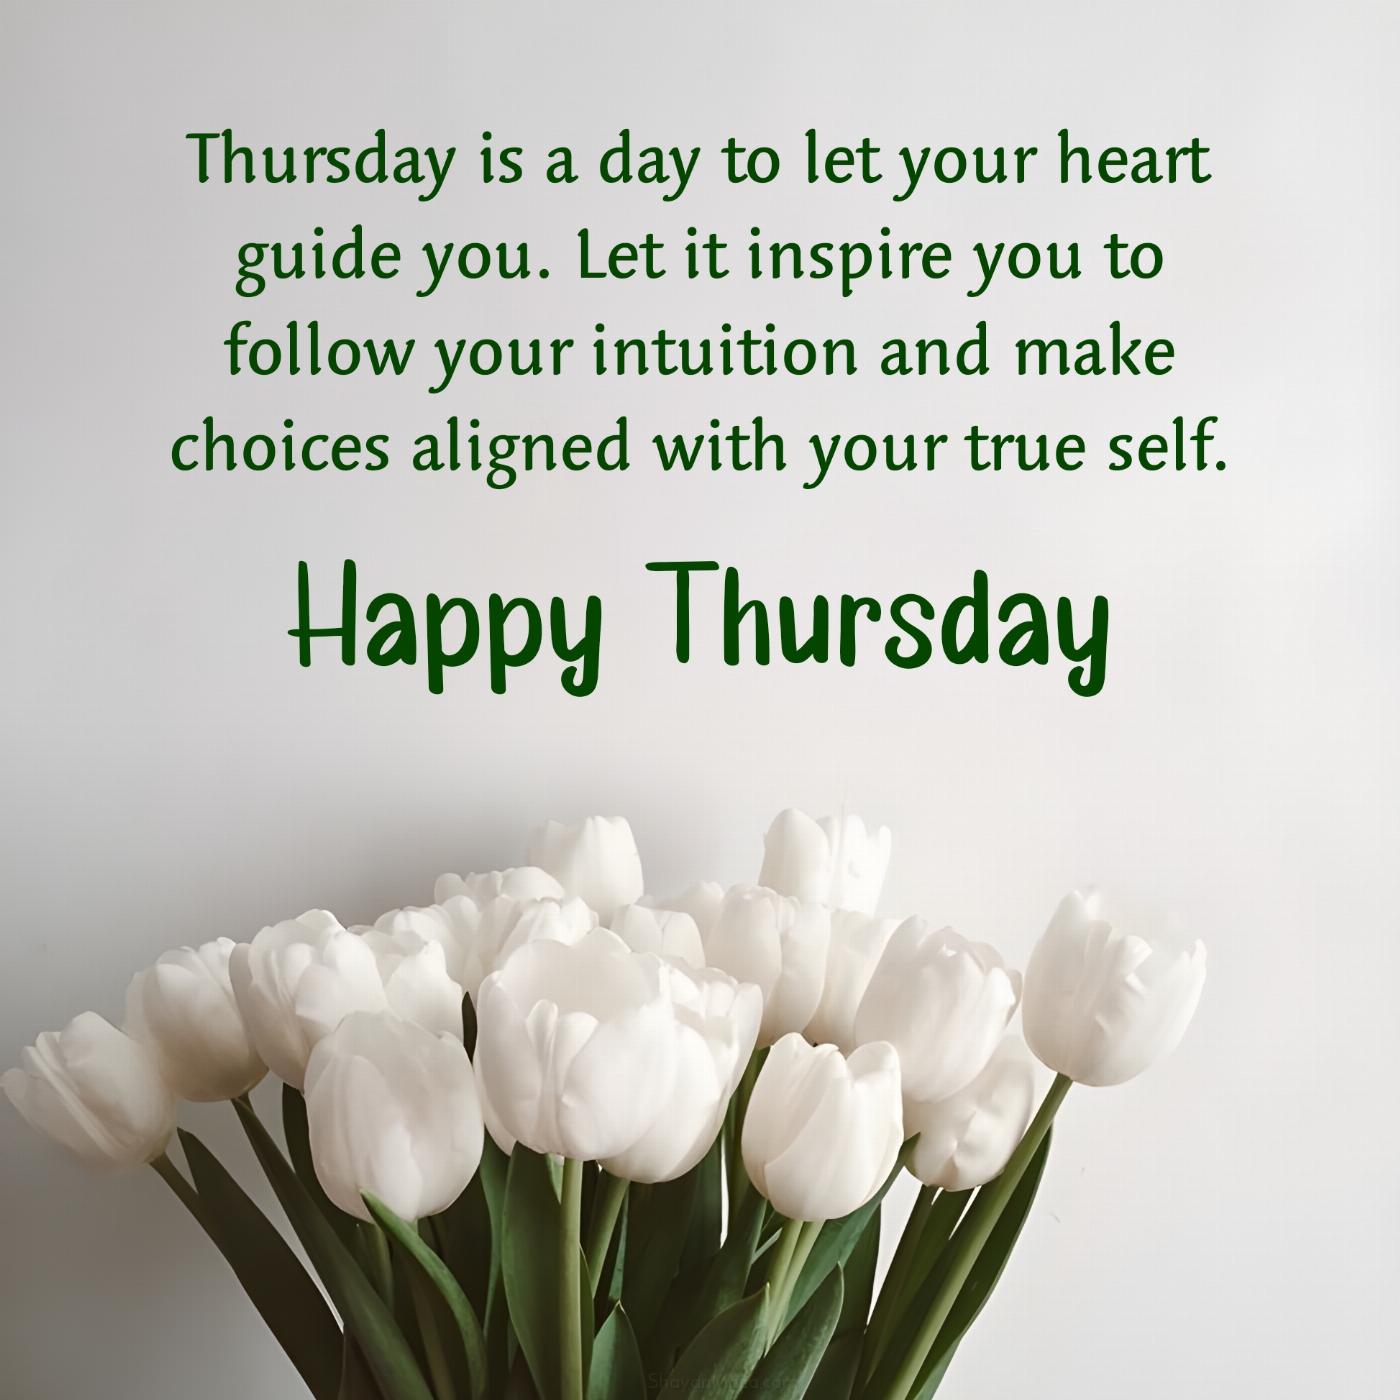 Thursday is a day to let your heart guide you